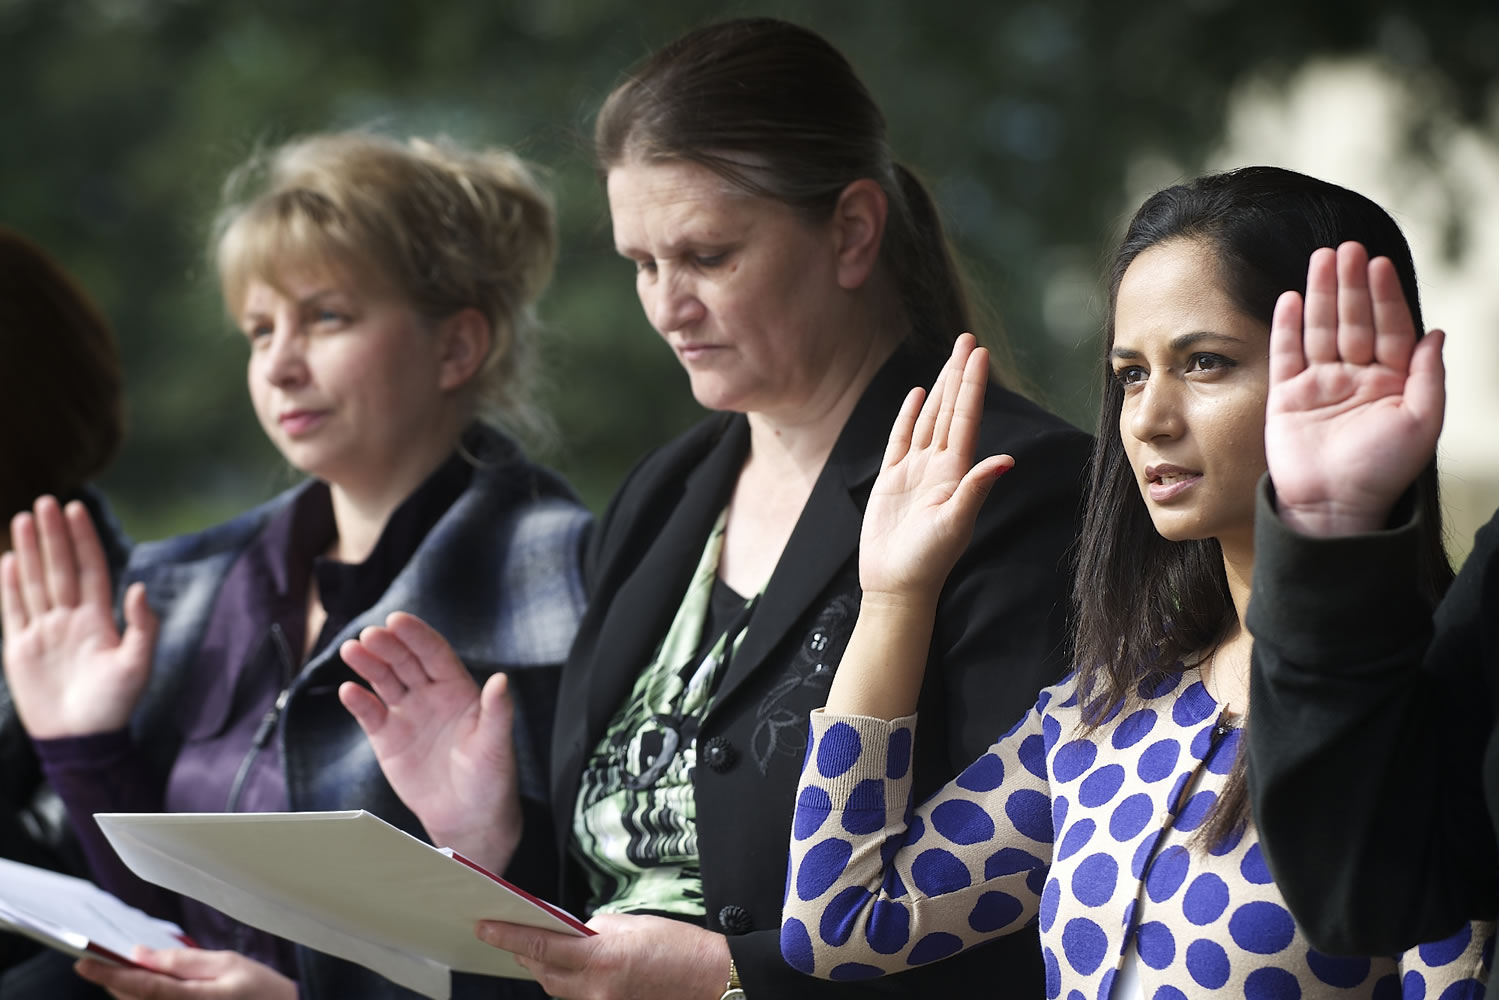 Sindhu Koirala, right, of Nepal recites the Oath of Allegiance during a U.S. Citizenship and Immigration Services naturalization ceremony Friday at the Fort Vancouver National Historic Site. She was among 29 people to become new U.S.